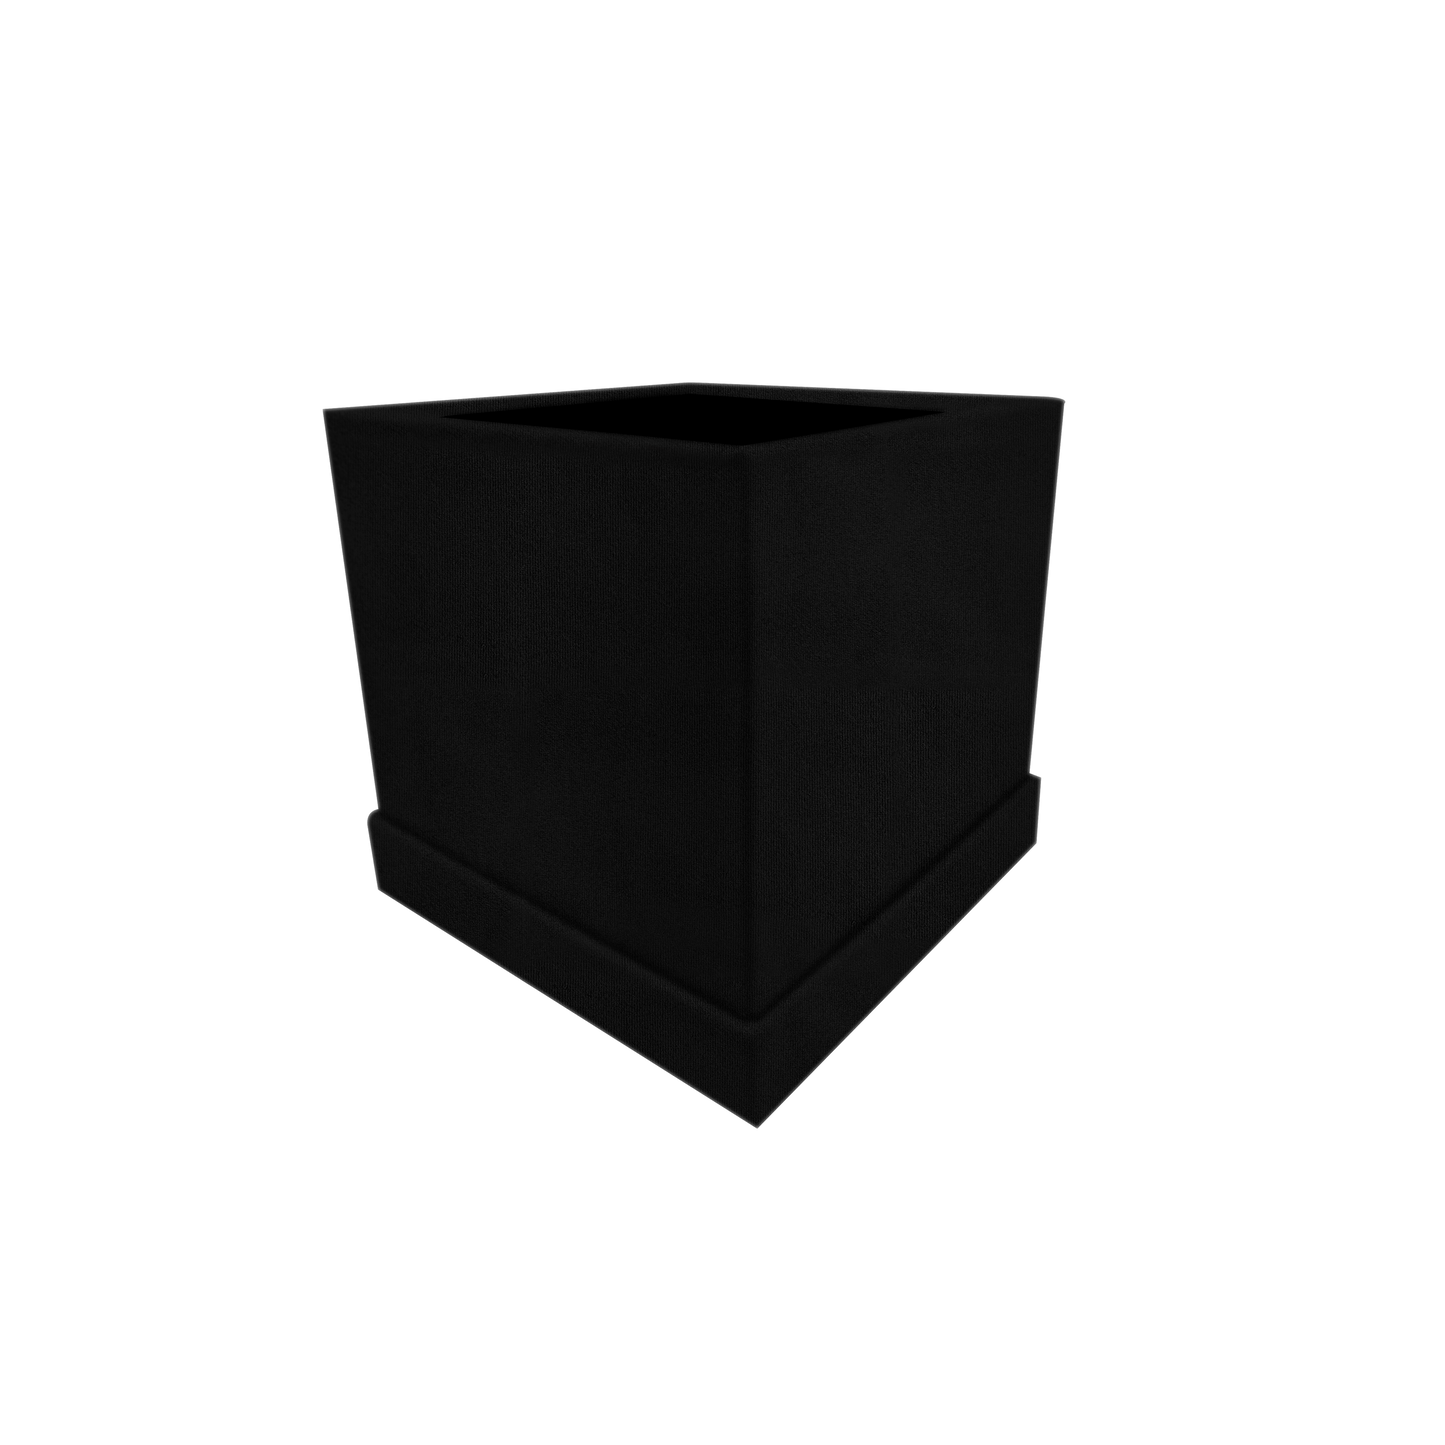 Kit 3 different sizes square shape boxes 3 in 1 - Suede Black